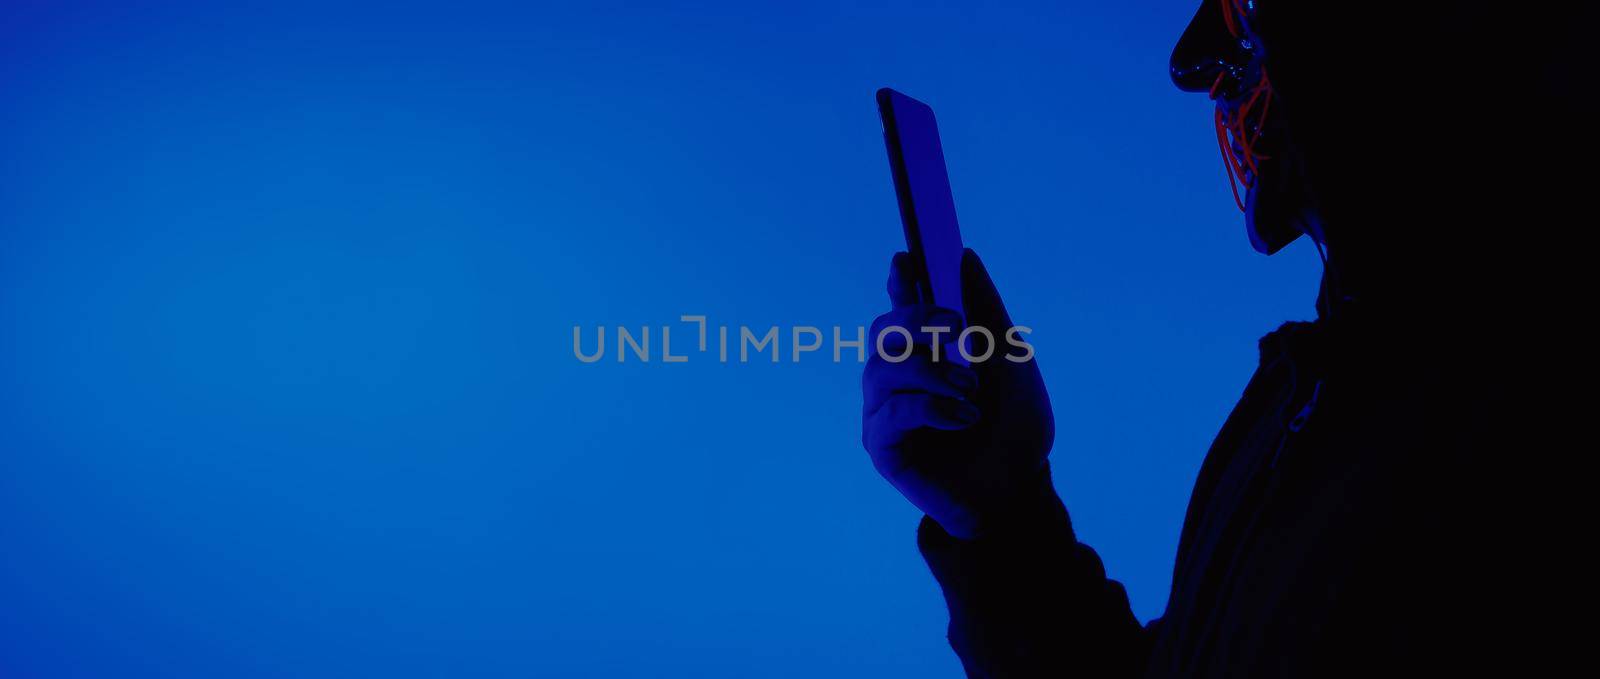 Digital security Concept. Anonymous hacker with mask holding smartphone hacked. by gnepphoto